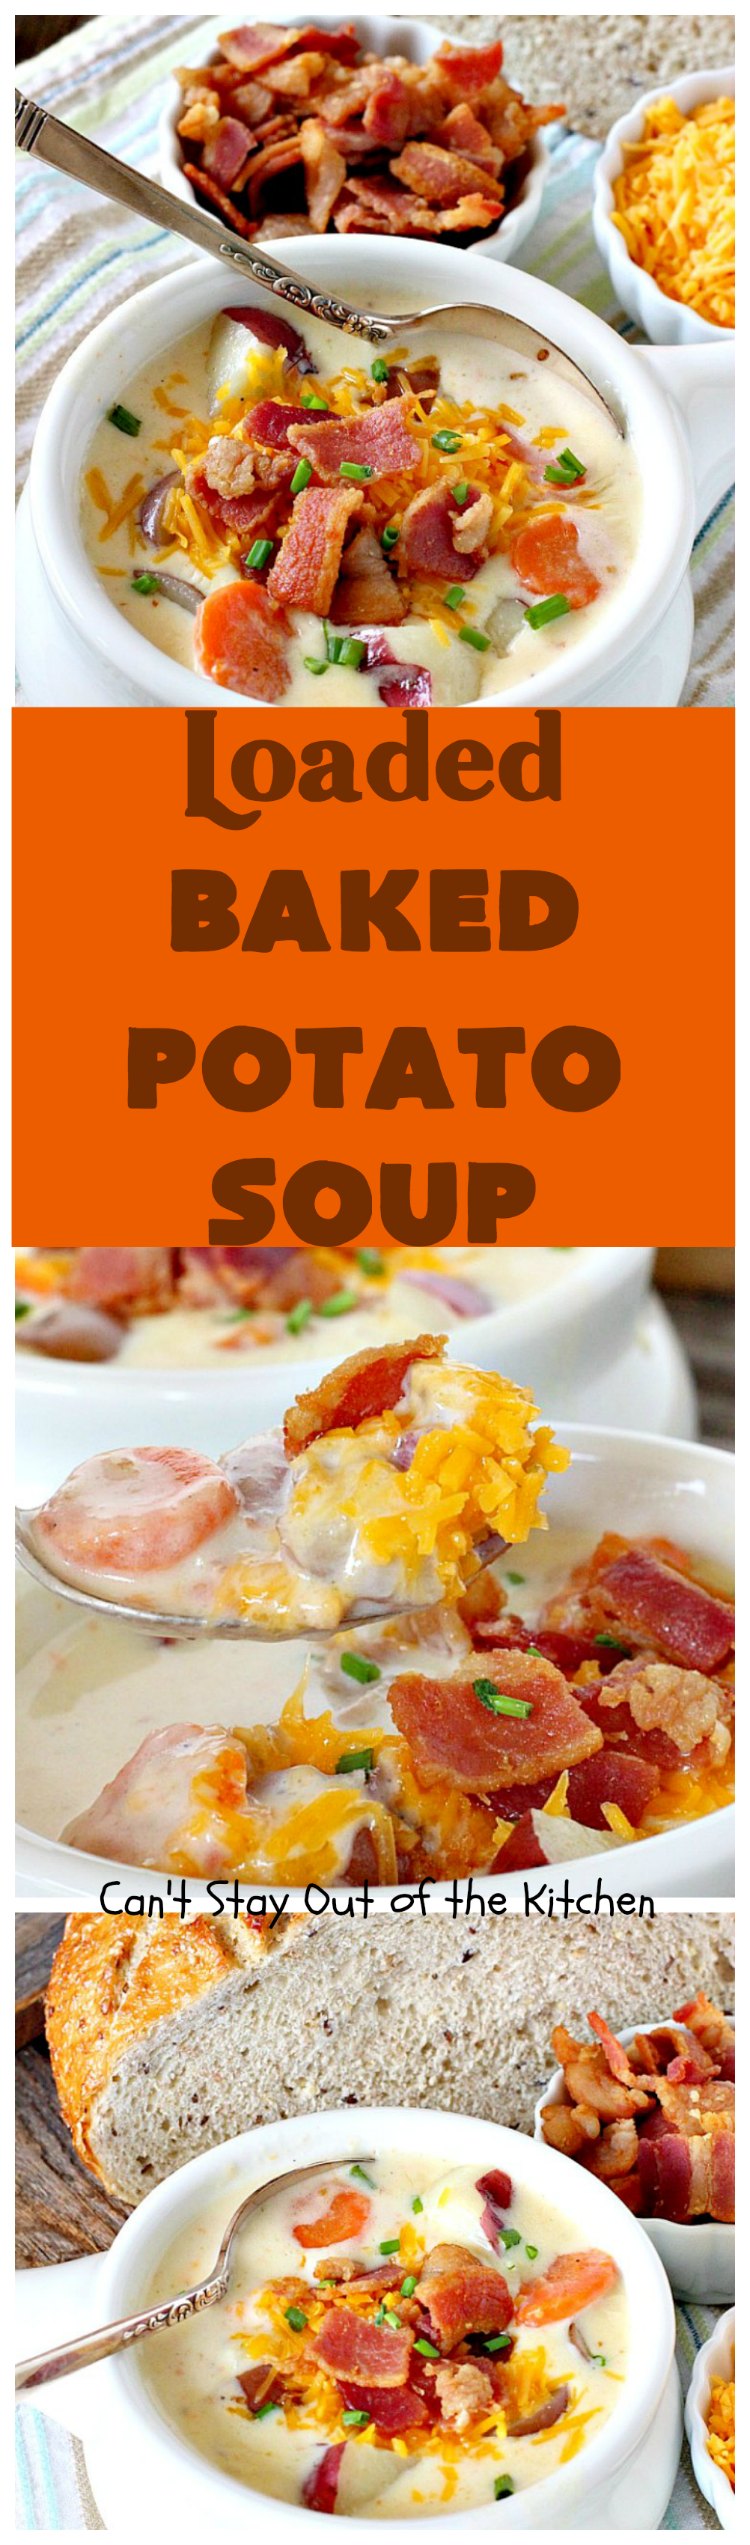 Loaded Baked Potato Soup | Can't Stay Out of the Kitchen